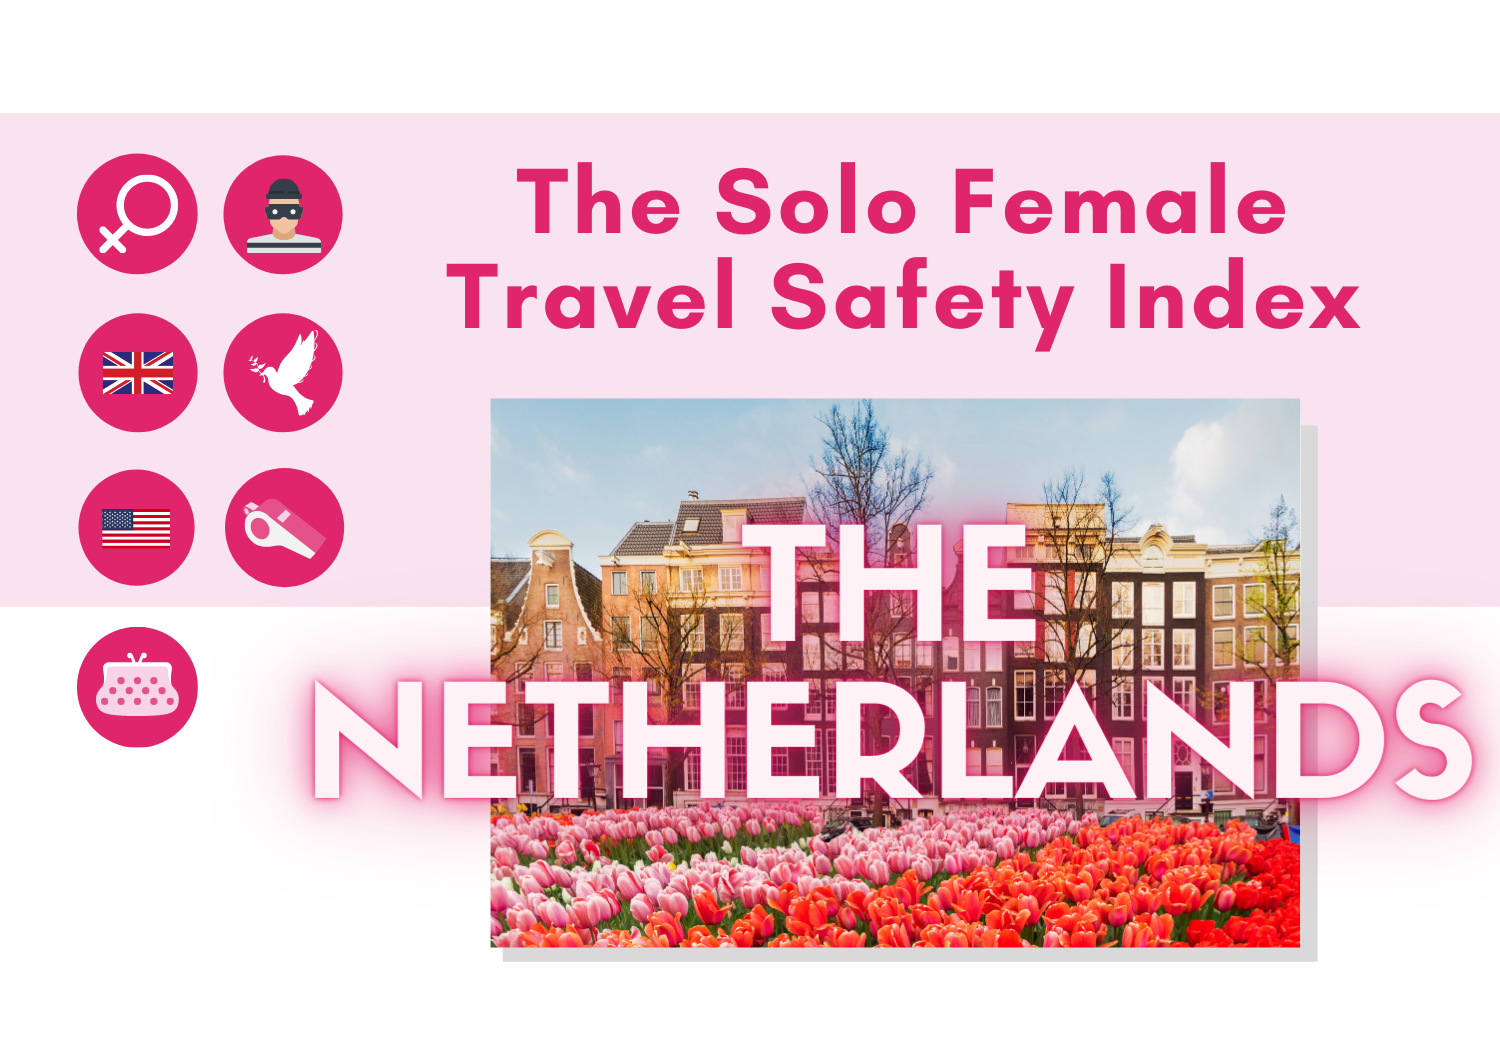 Solo female travel safety in The Netherlands